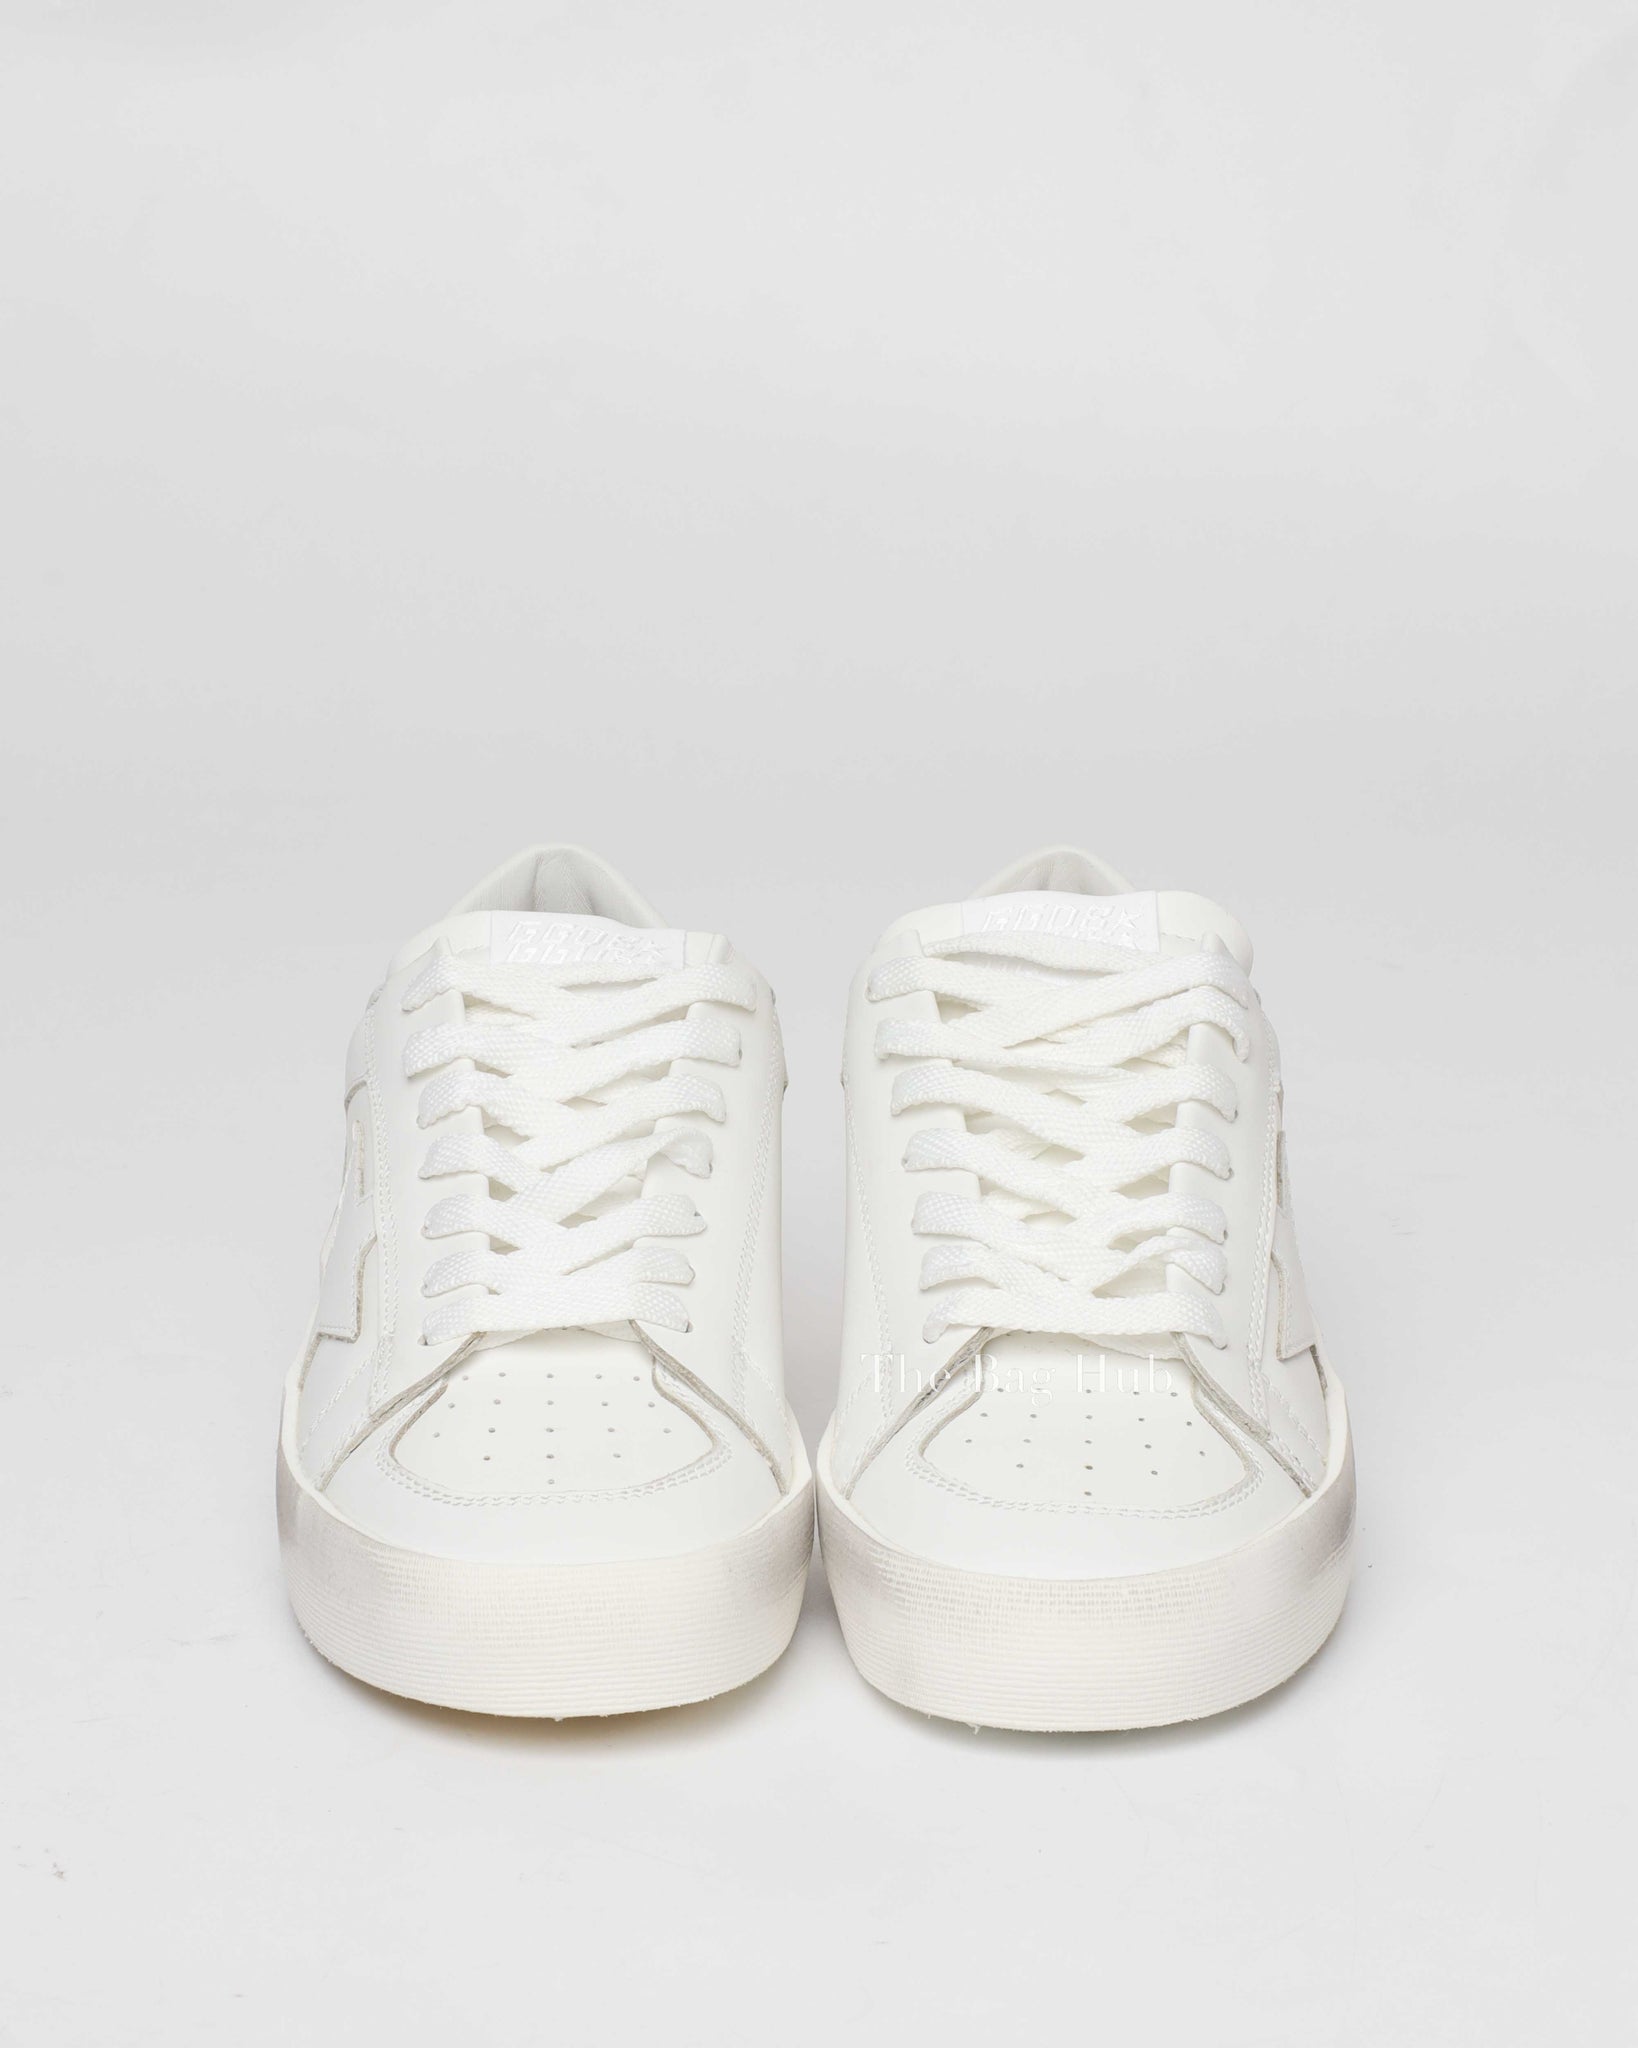 Golden Goose White Leather Stardan Sneakers Size 36-3